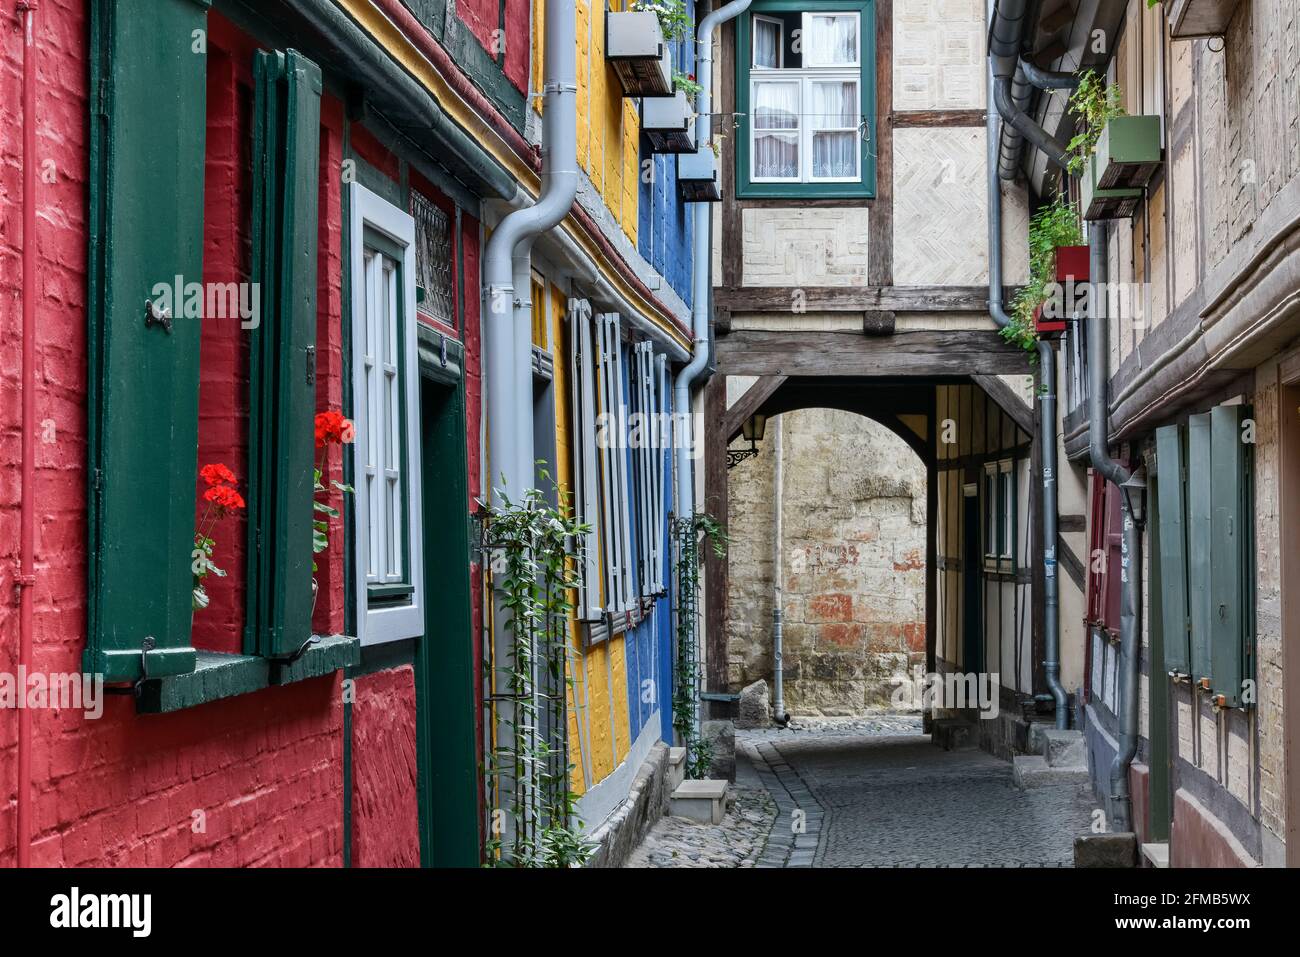 Germany, Saxony-Anhalt, Quedlinburg, narrow lane, colorful half-timbered houses in the historic old town Stock Photo